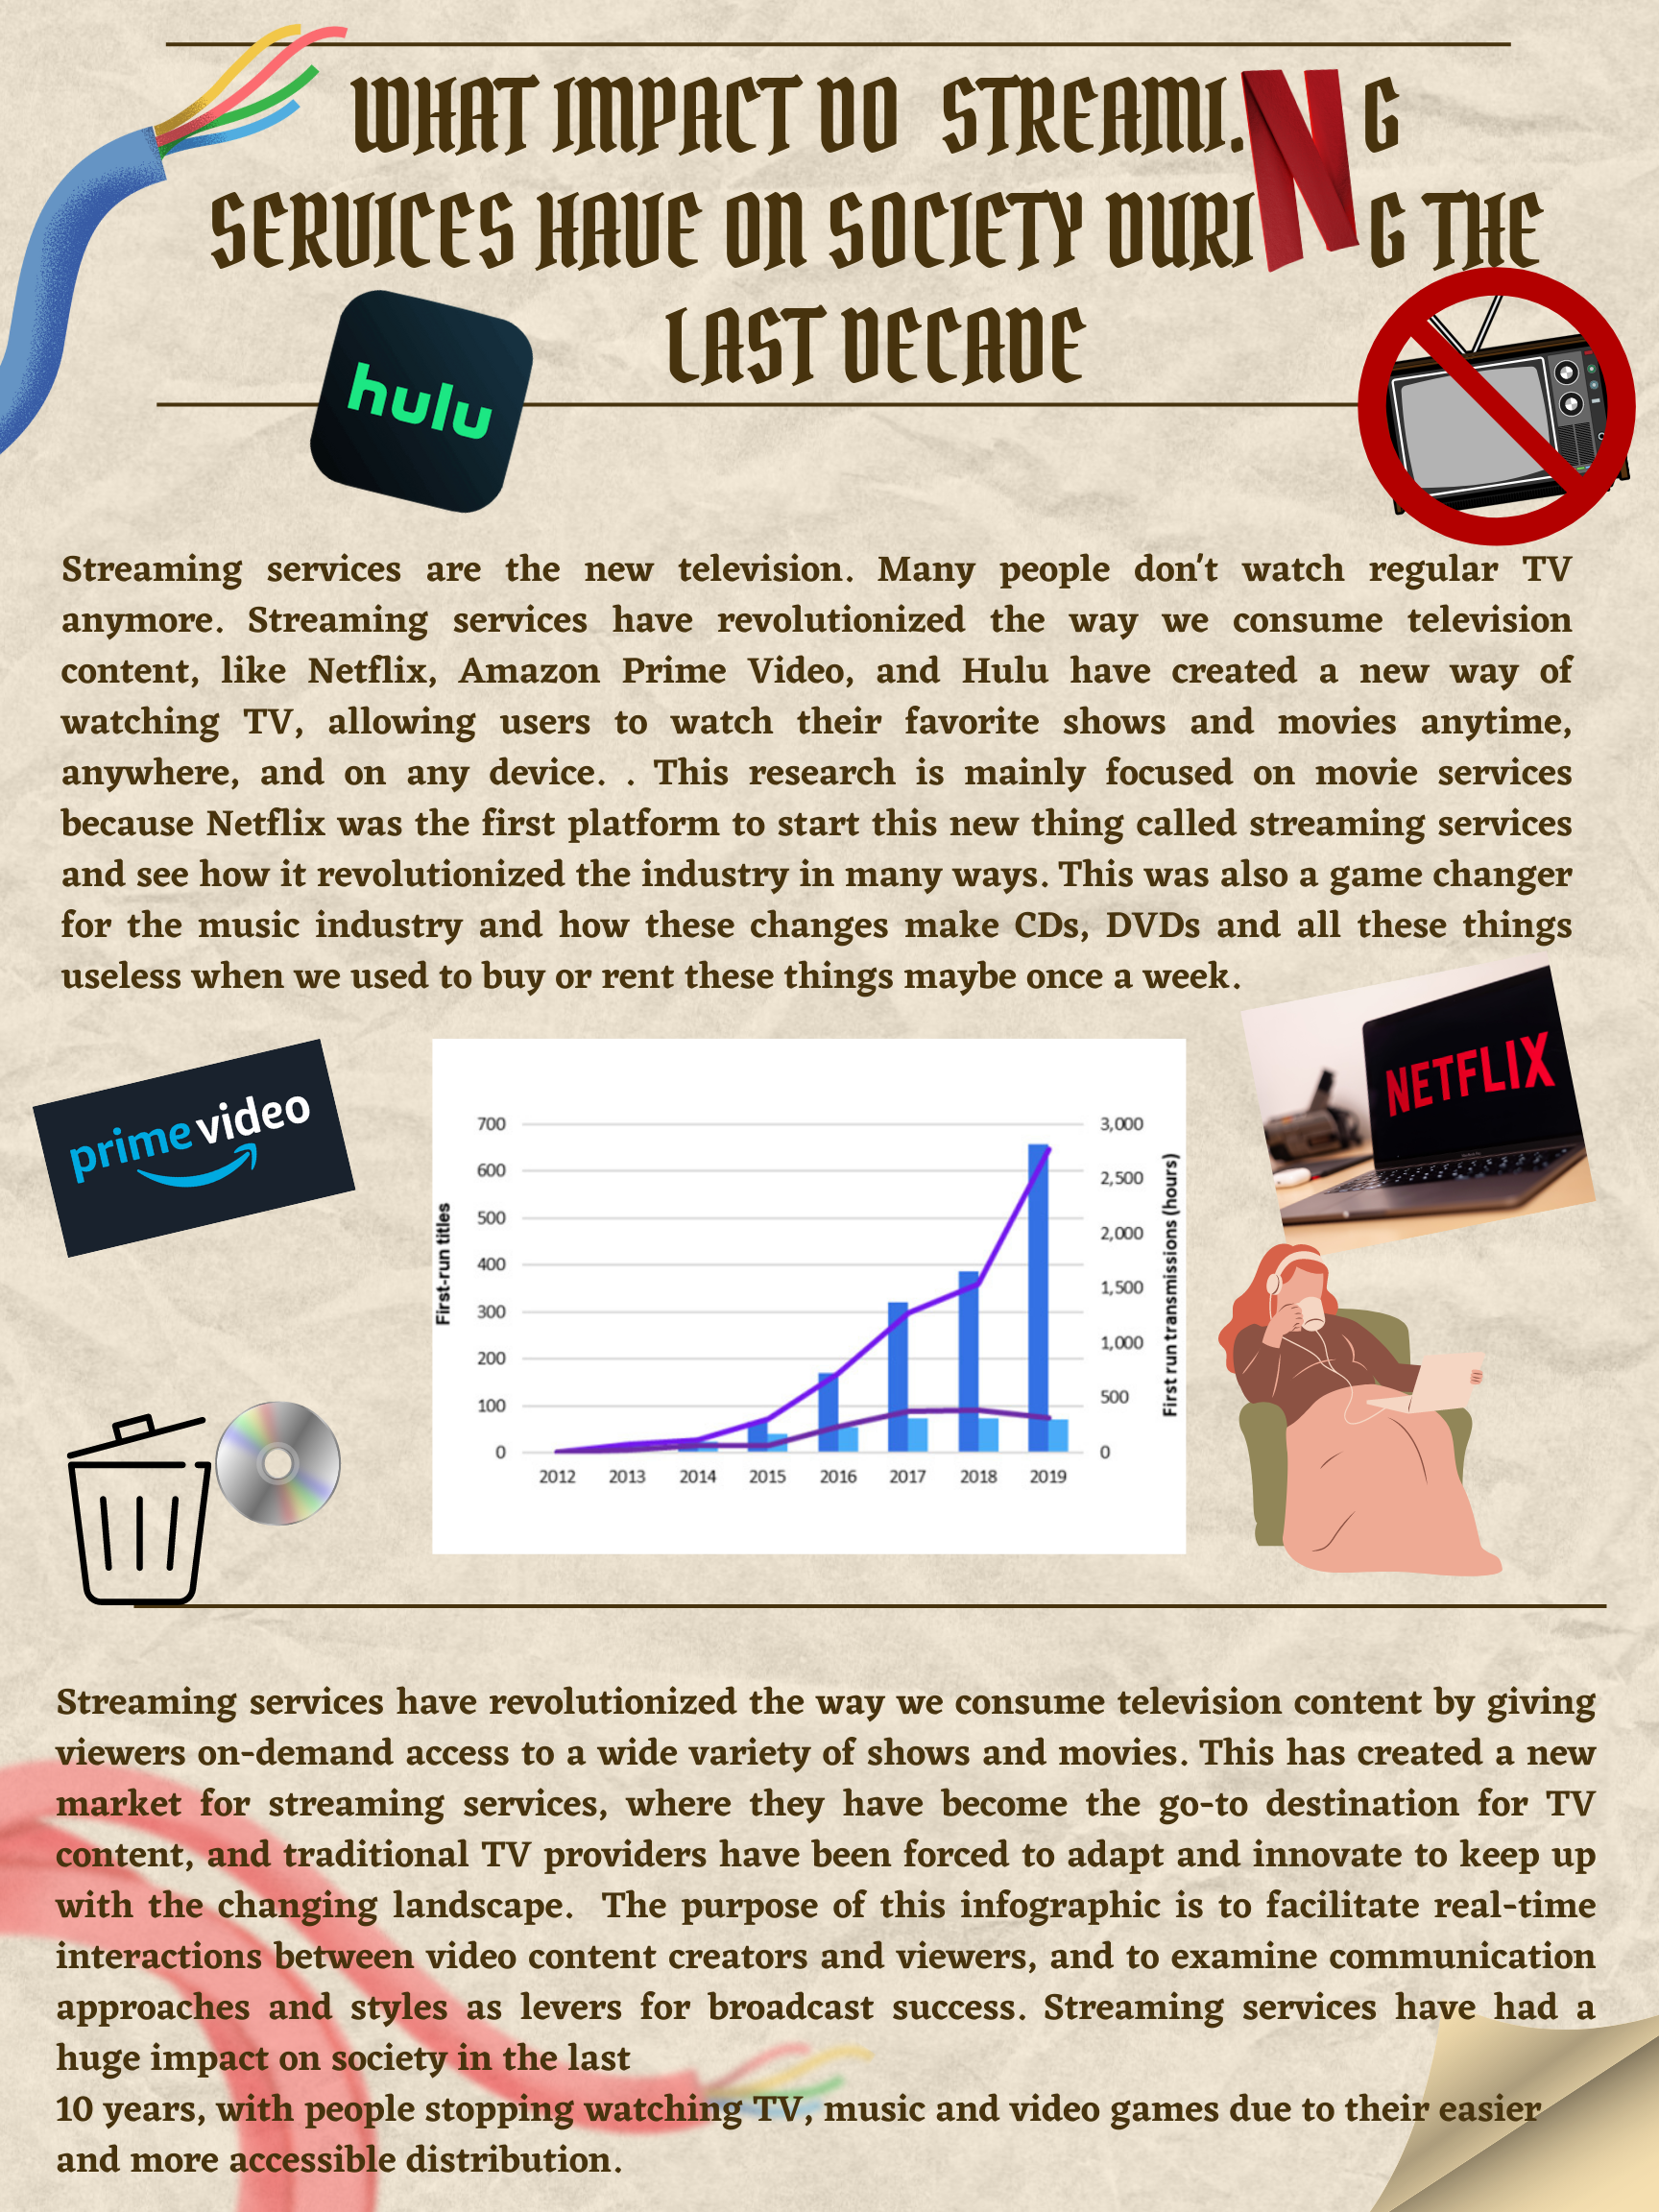  Visual Presentation byDiego Cardena-Botello The project Name is What impact do streaming services have on society during the last decade question mark